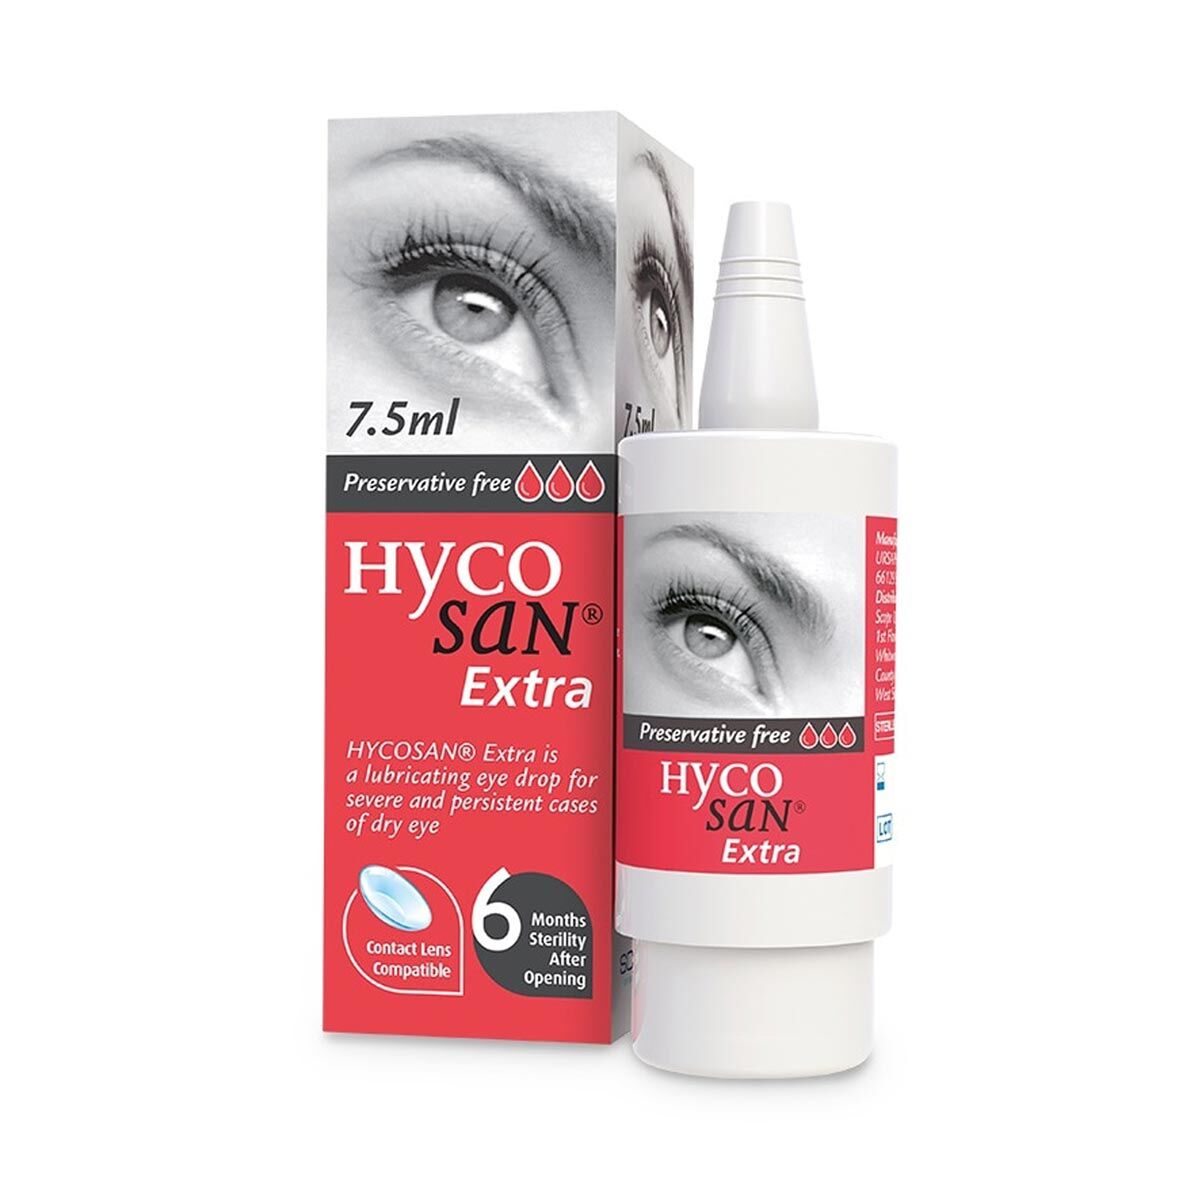 Scope Hycosan Extra Eye Drops (7.5ml), Dry Eye Relief, Preservative Free